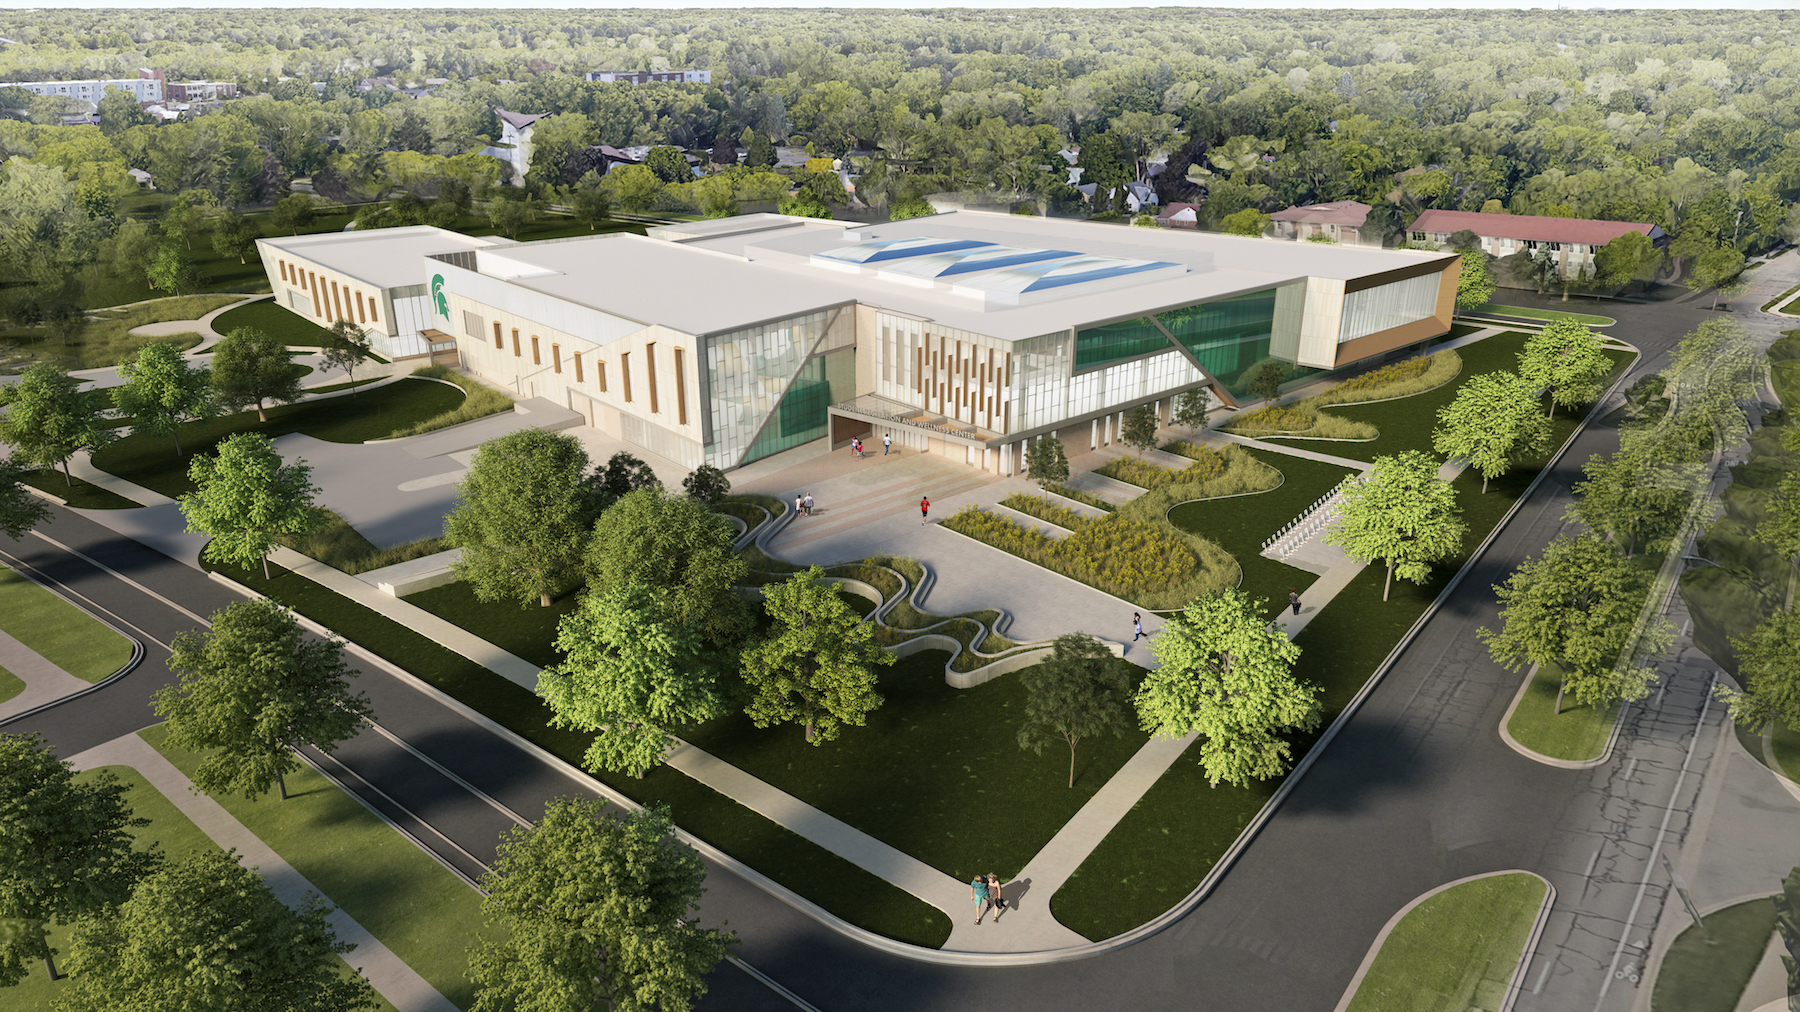 MIchigan State University's new rec center will emphasize its natural surroundings.